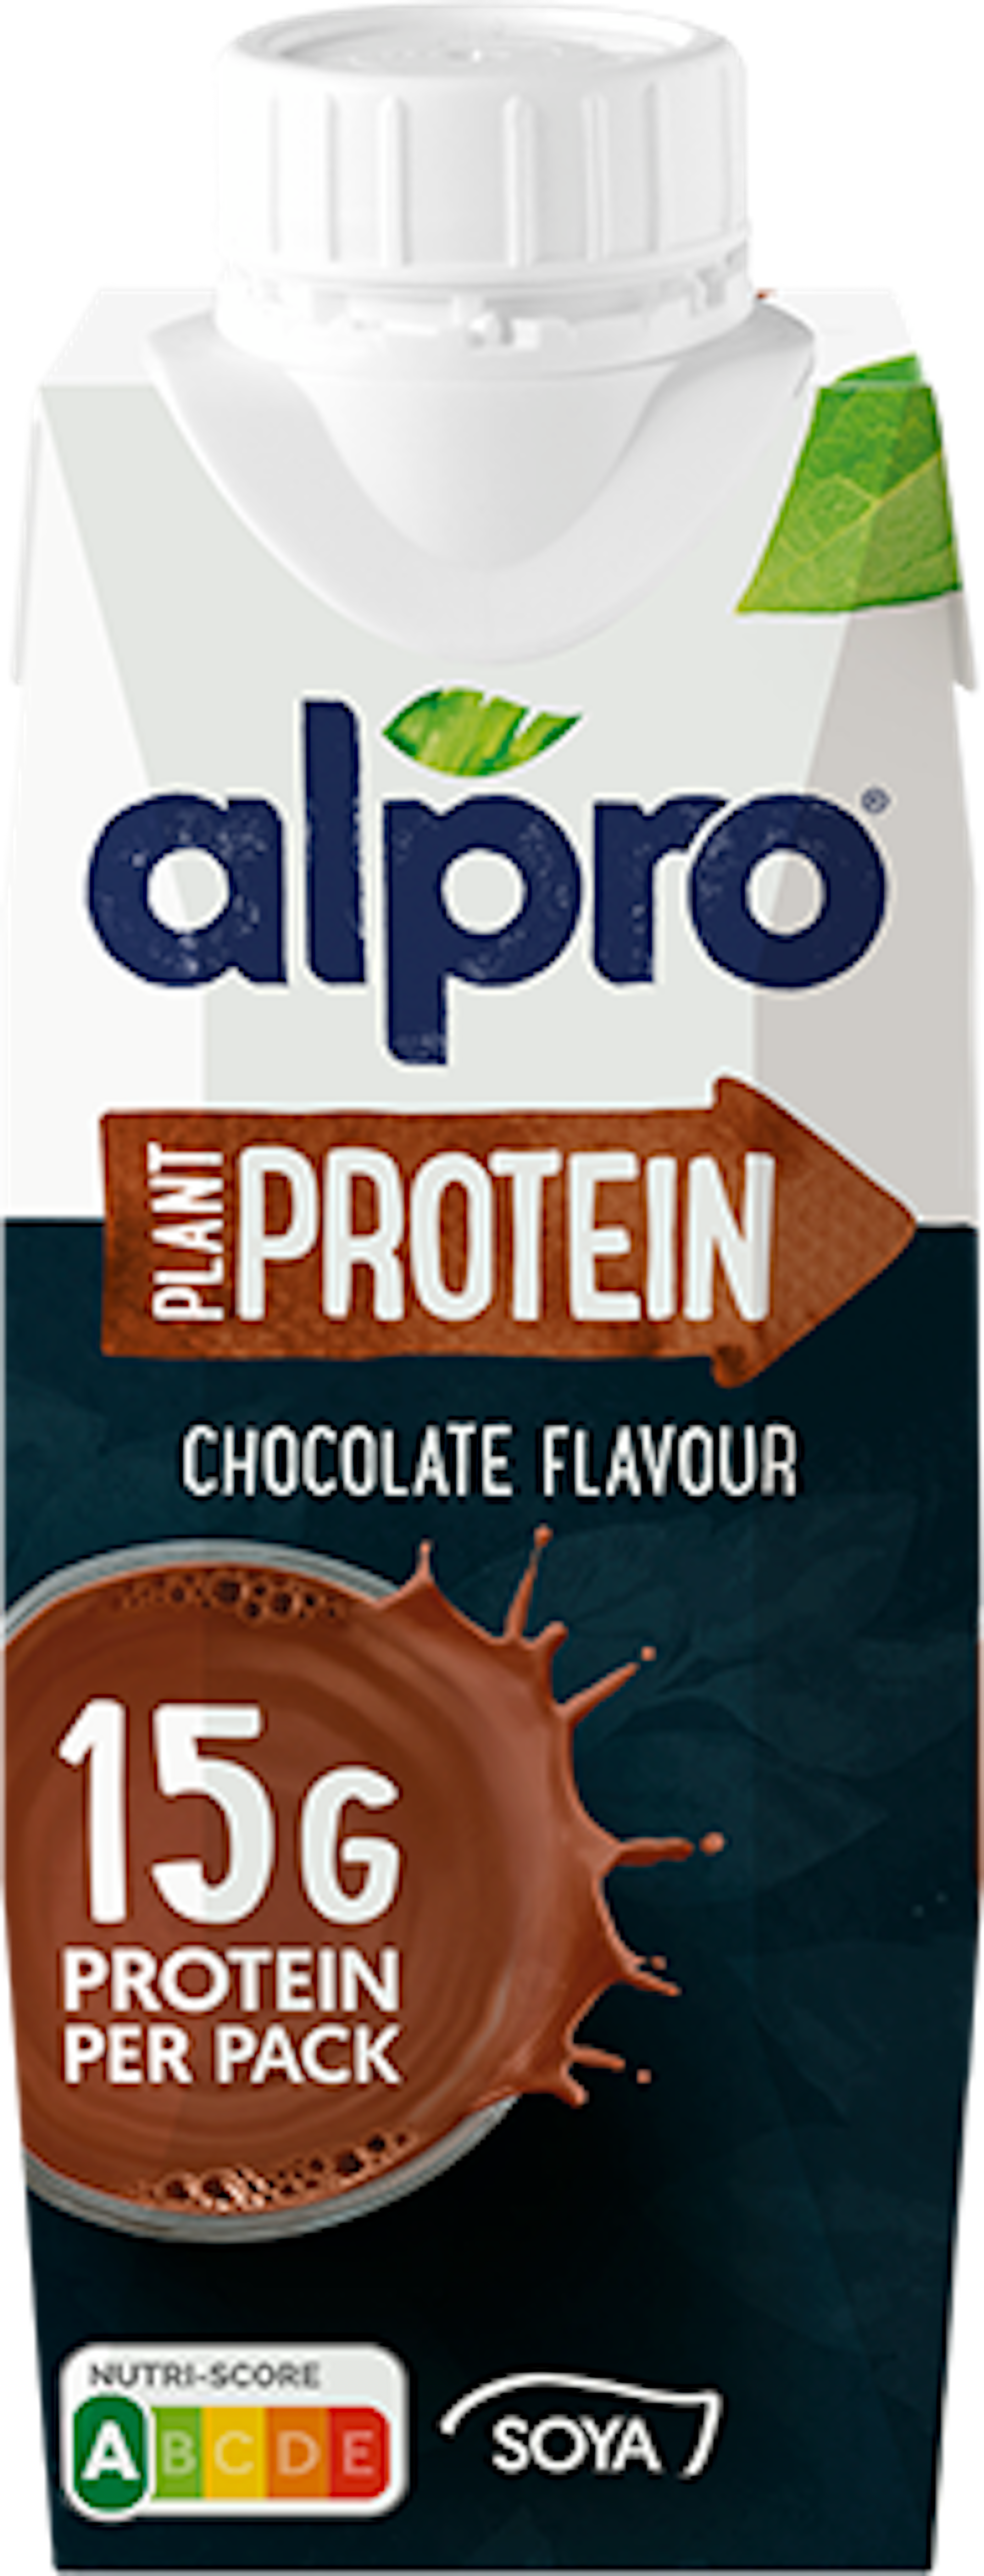 Alpro Protein Chocolate